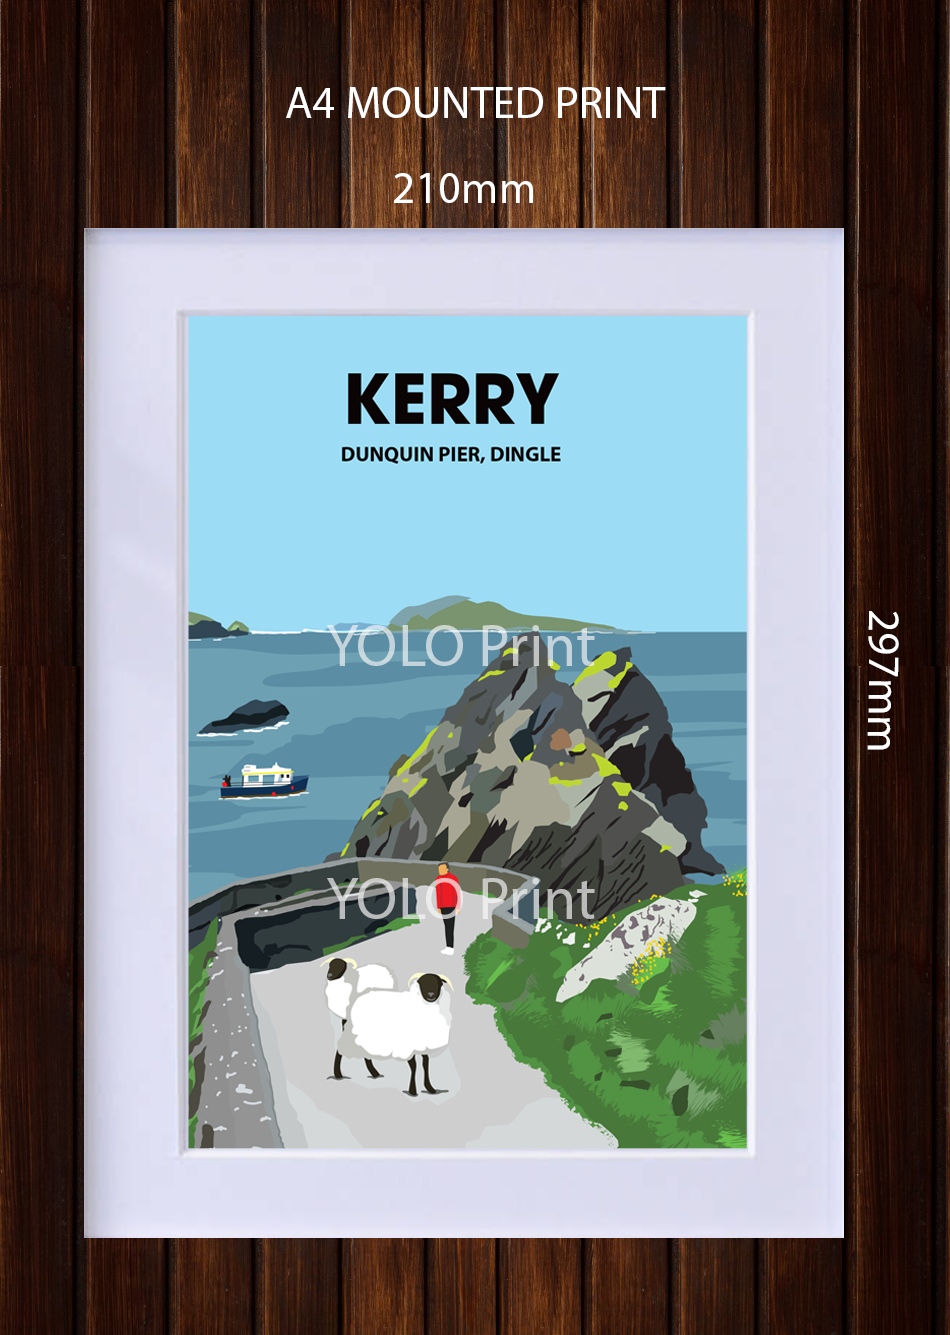 Kerry Postcard or A4 Mounted Print  - Dunquin Pier, Dingle